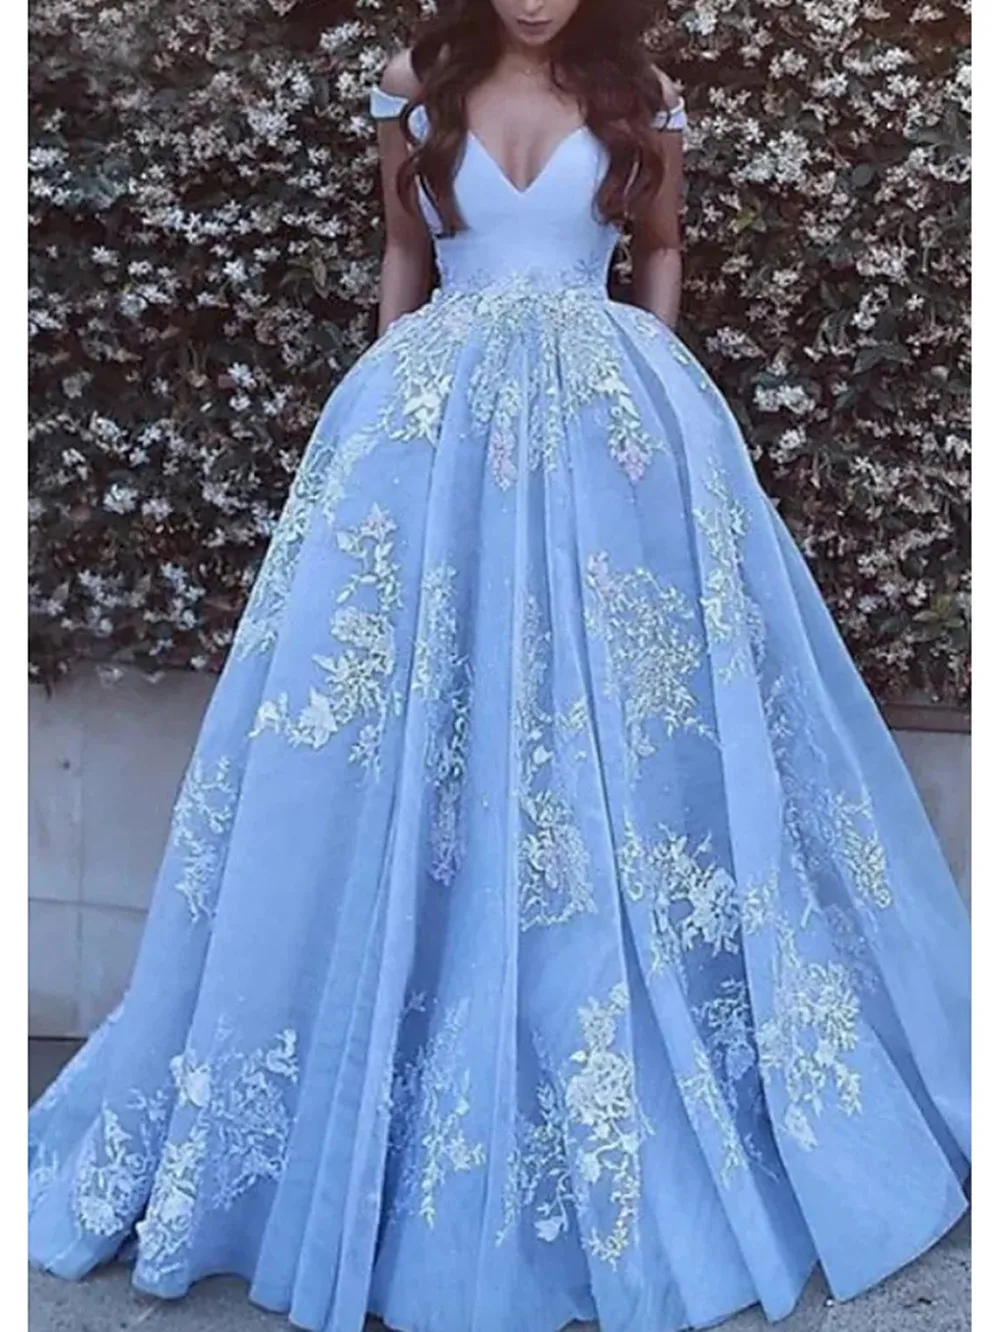 

Ball Gown Luxurious Floral Quinceanera Formal Evening Dress Off Shoulder Short Sleeve Chapel Train Tulle with Pleats Appliques 2